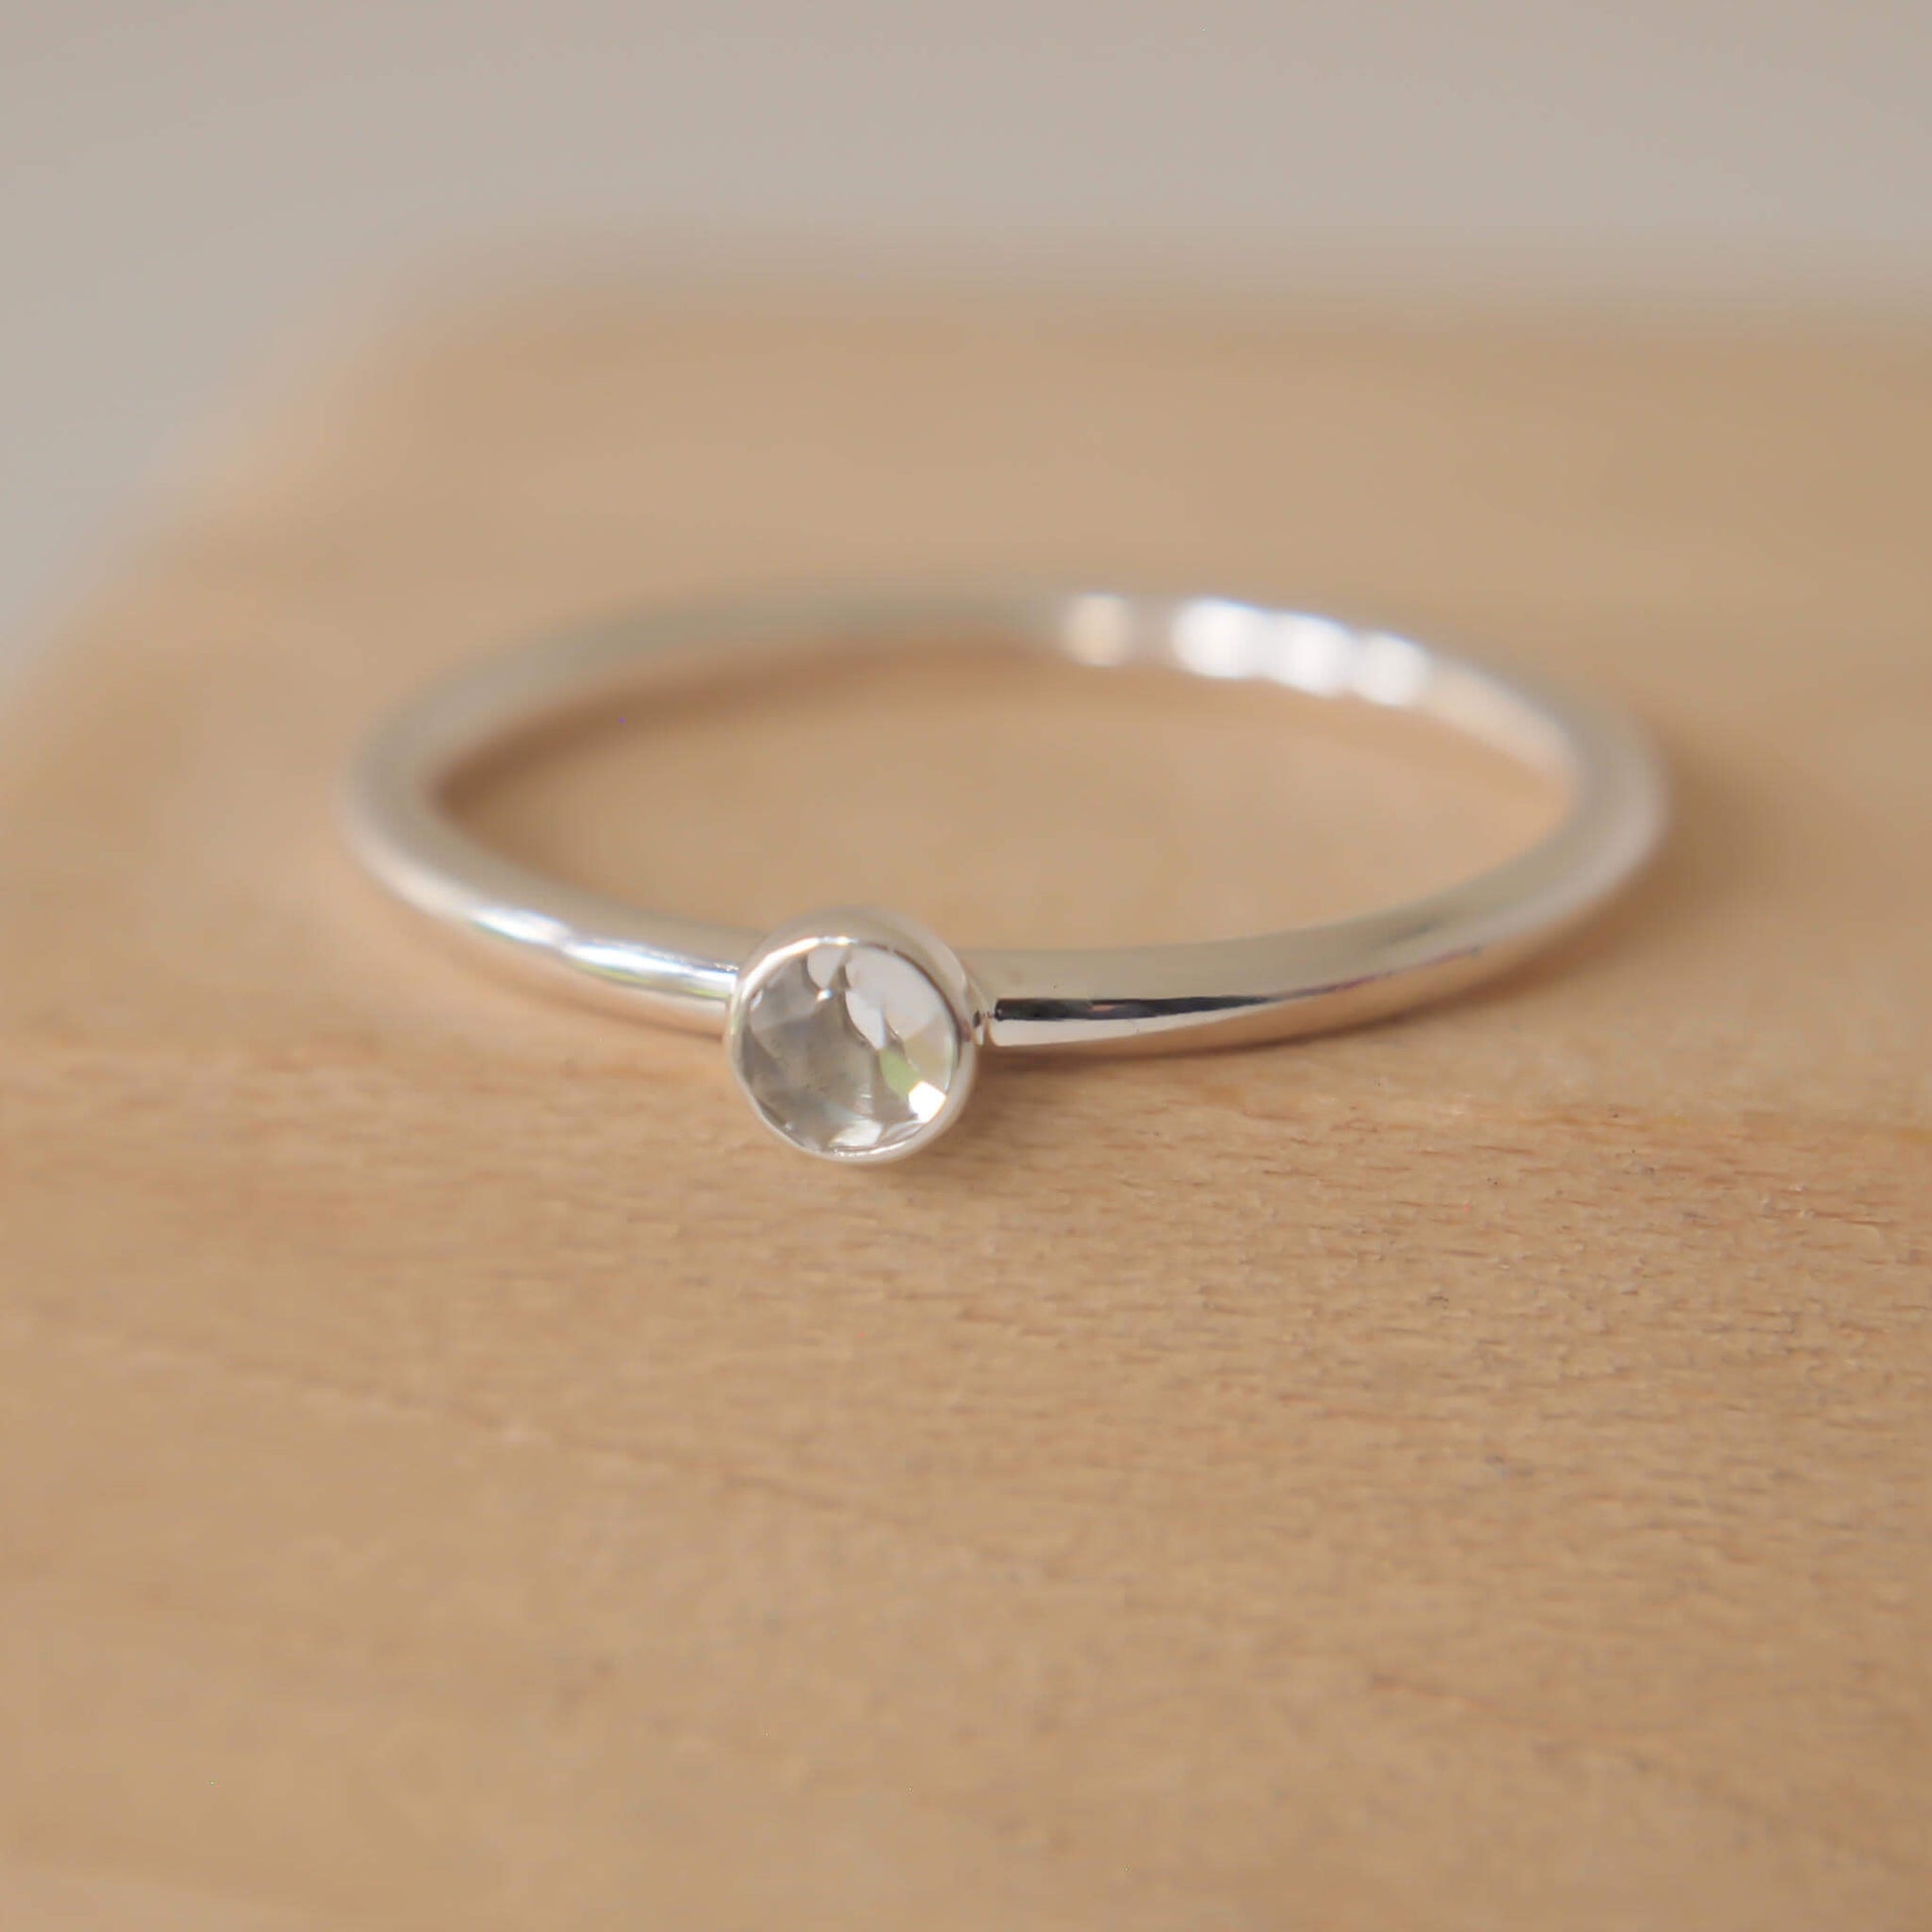 White Topaz and Sterling Silver simple minimalist ring with a 3mm round clear facet cut White Topaz, Birthstone for April. Handmade in Scotland by maram jewellery